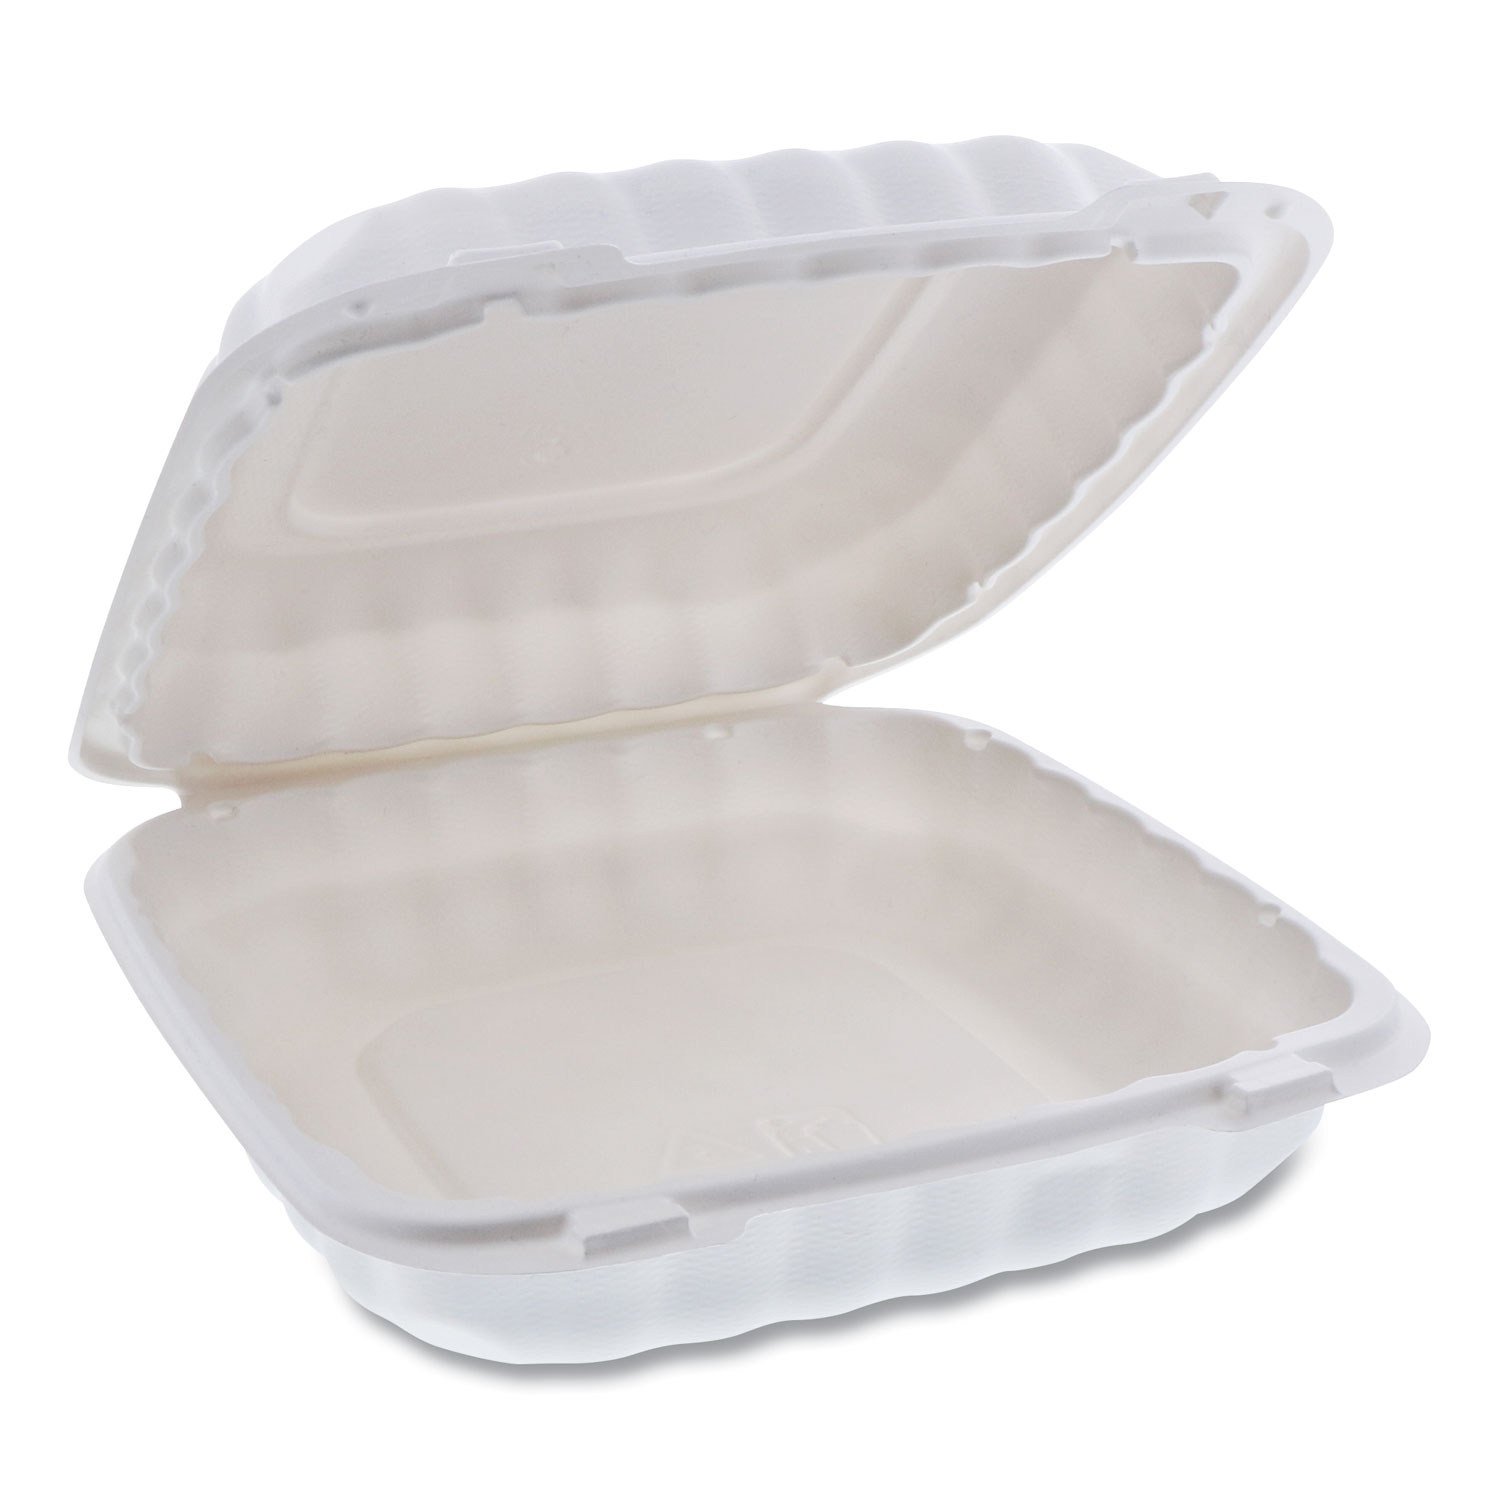 Pactiv EarthChoice SmartLock Microwavable Hinged Lid Containers, 9 x 9 x 3.1, White, 120/Carton